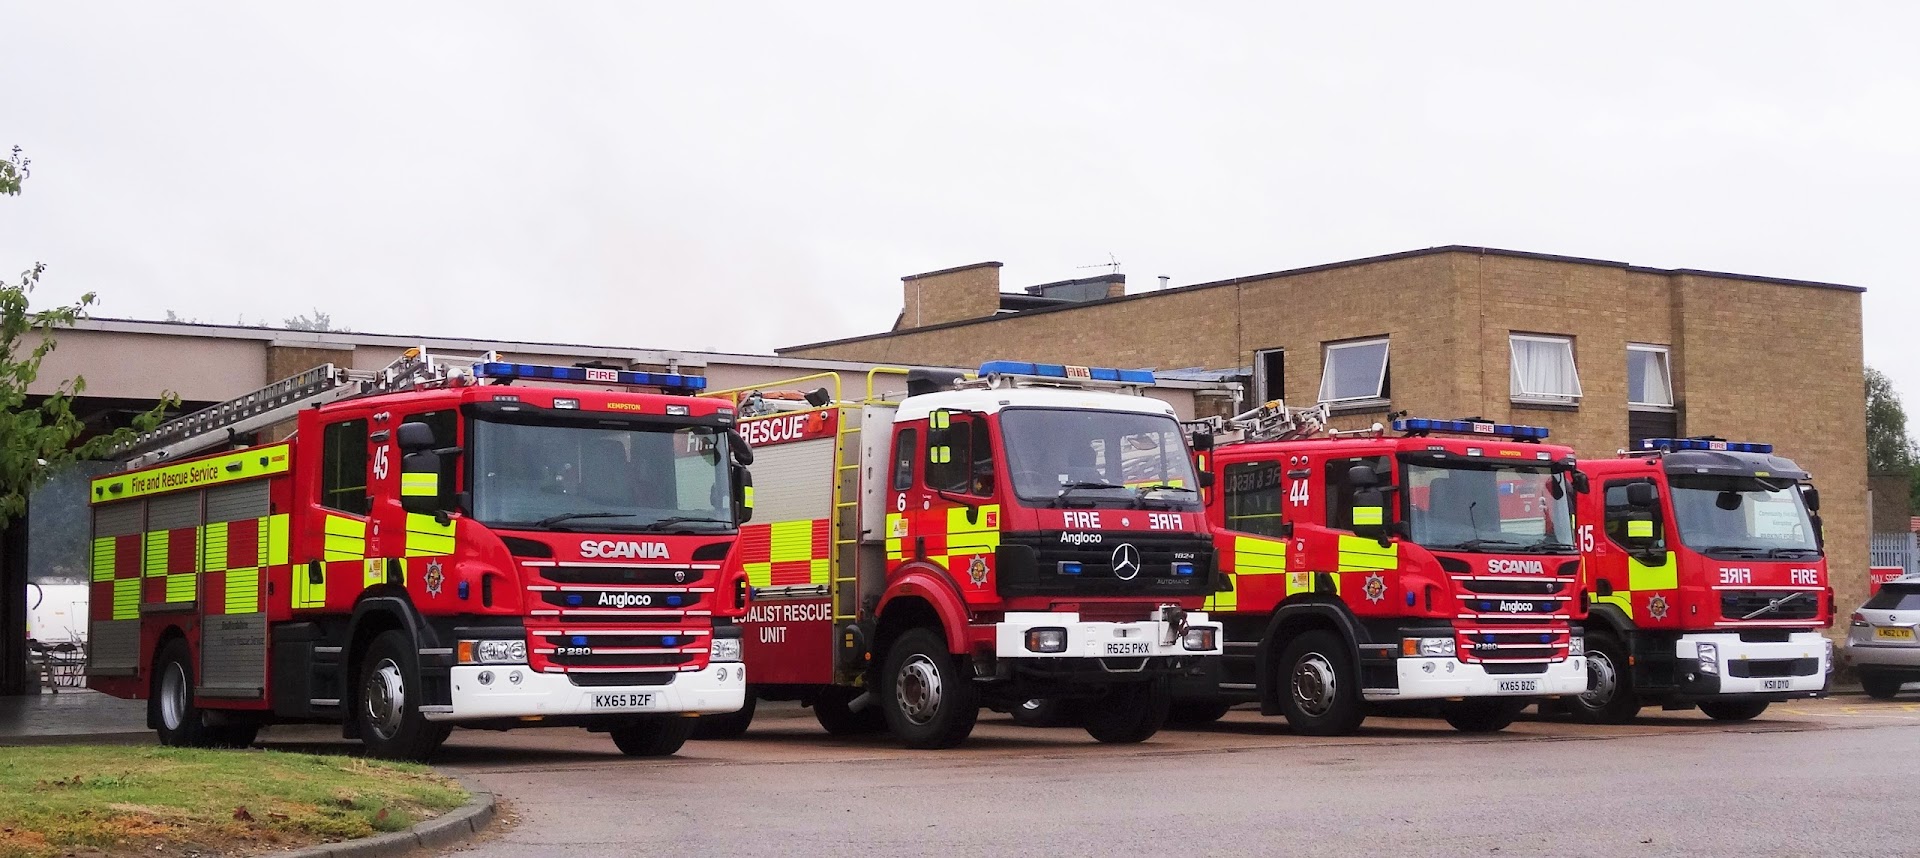 Bedfordshire and Luton Fire and Rescue Service